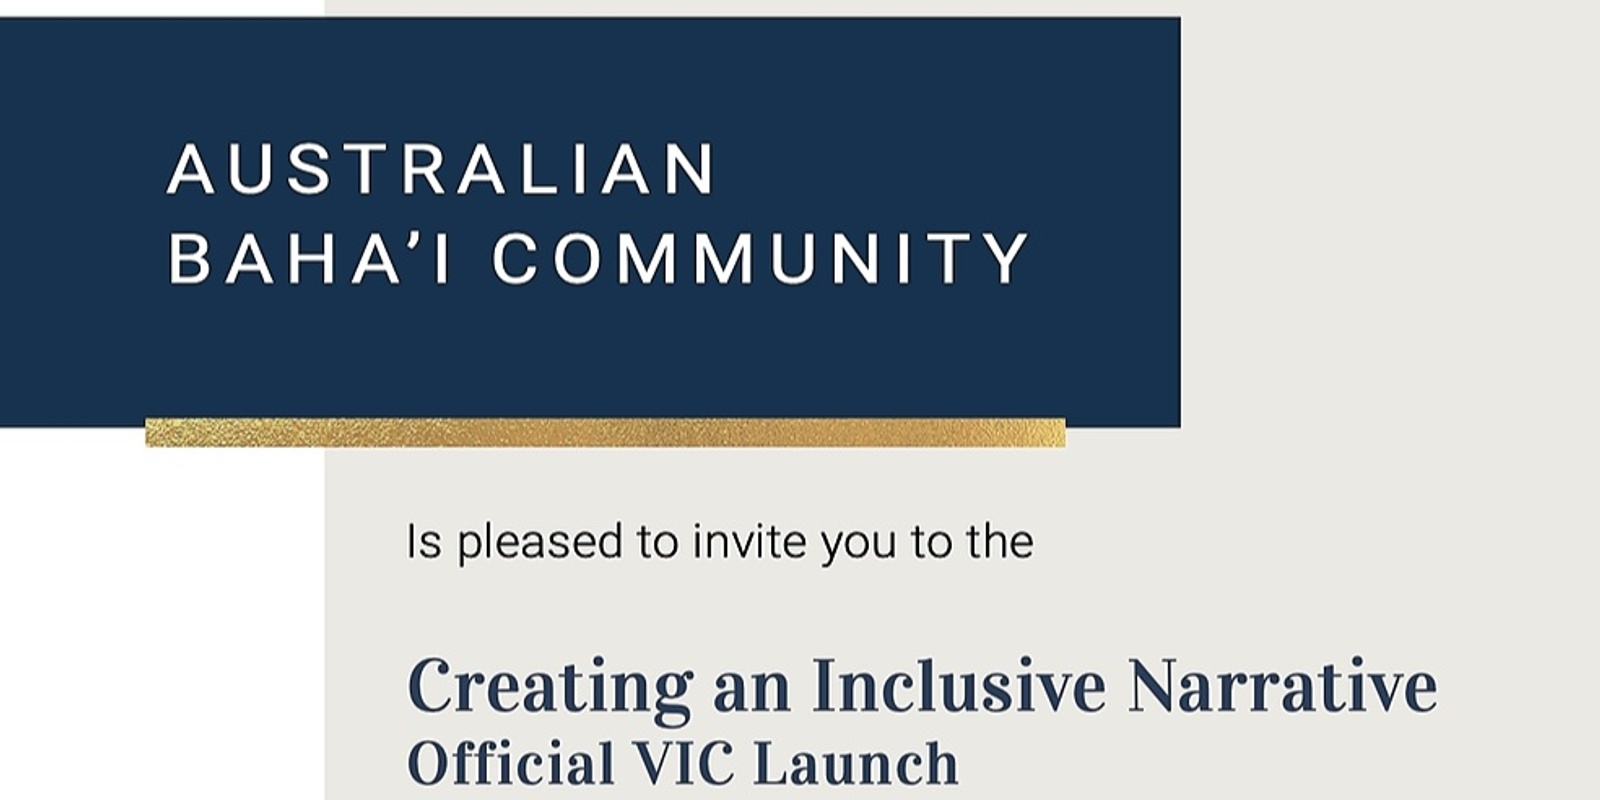 Creating an Inclusive Narrative - VIC Launch